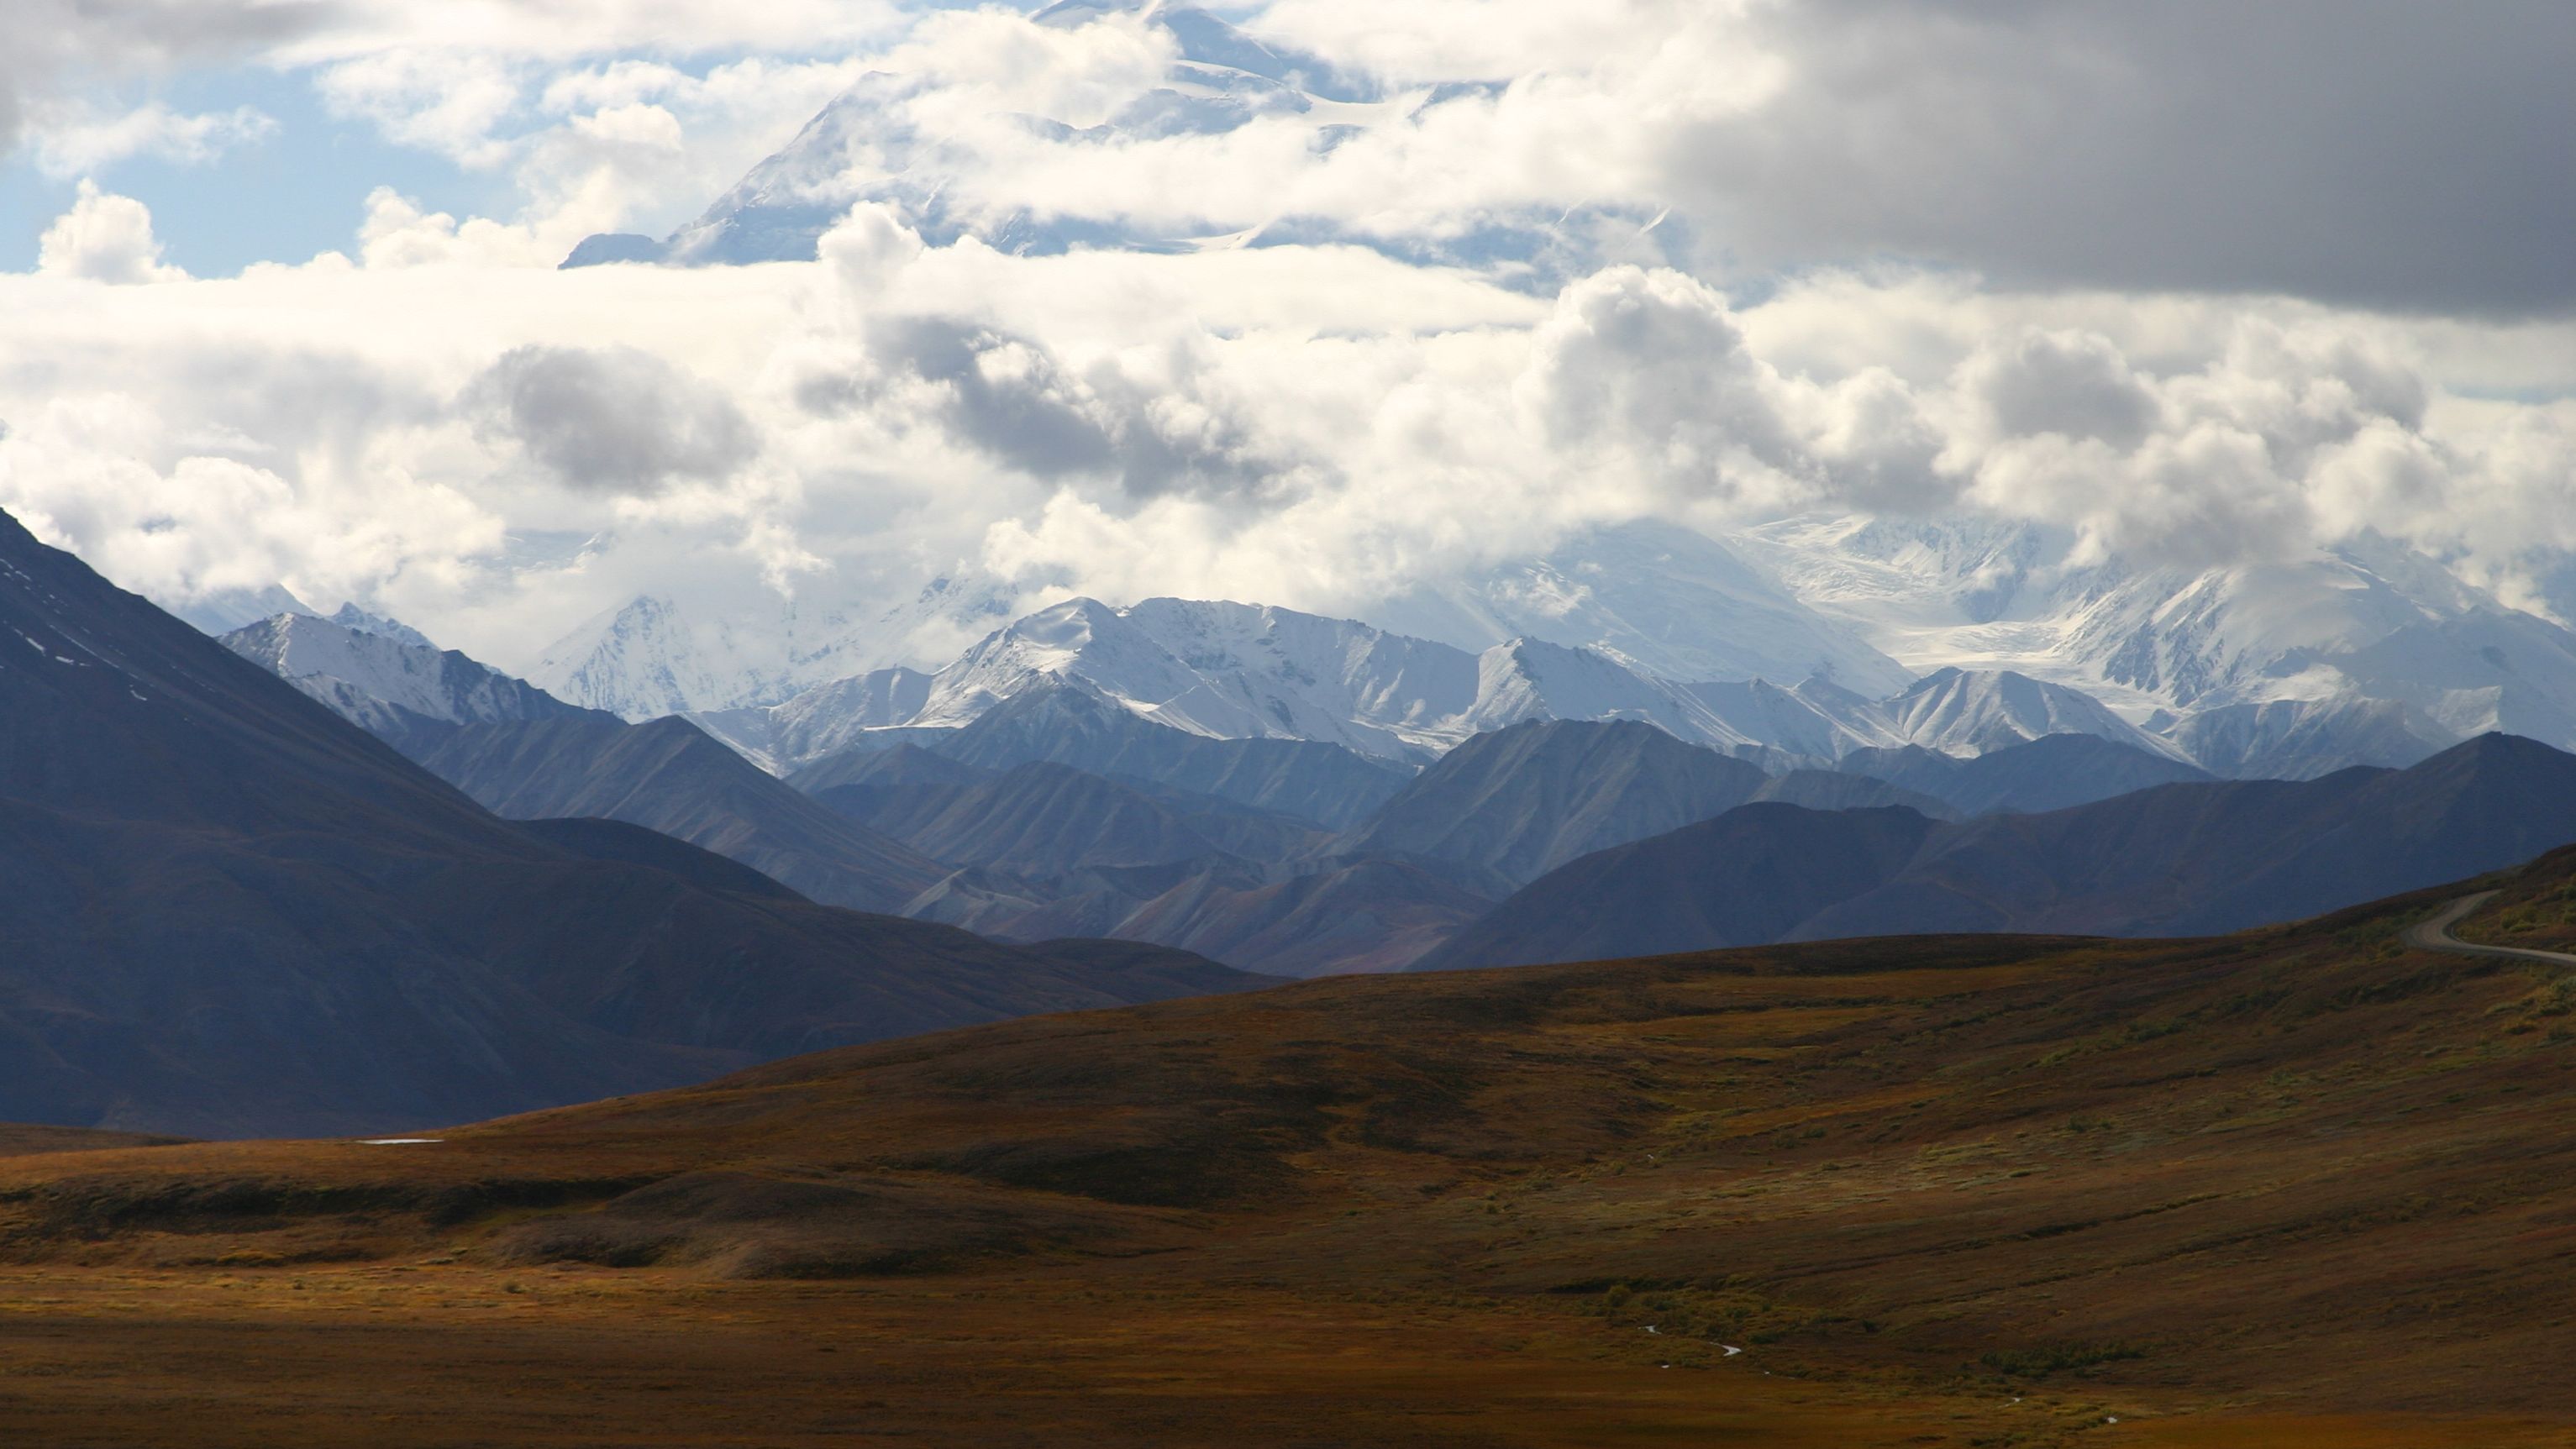 The area of Denali National Park where a bear killed a man Friday is closed "until further notice."